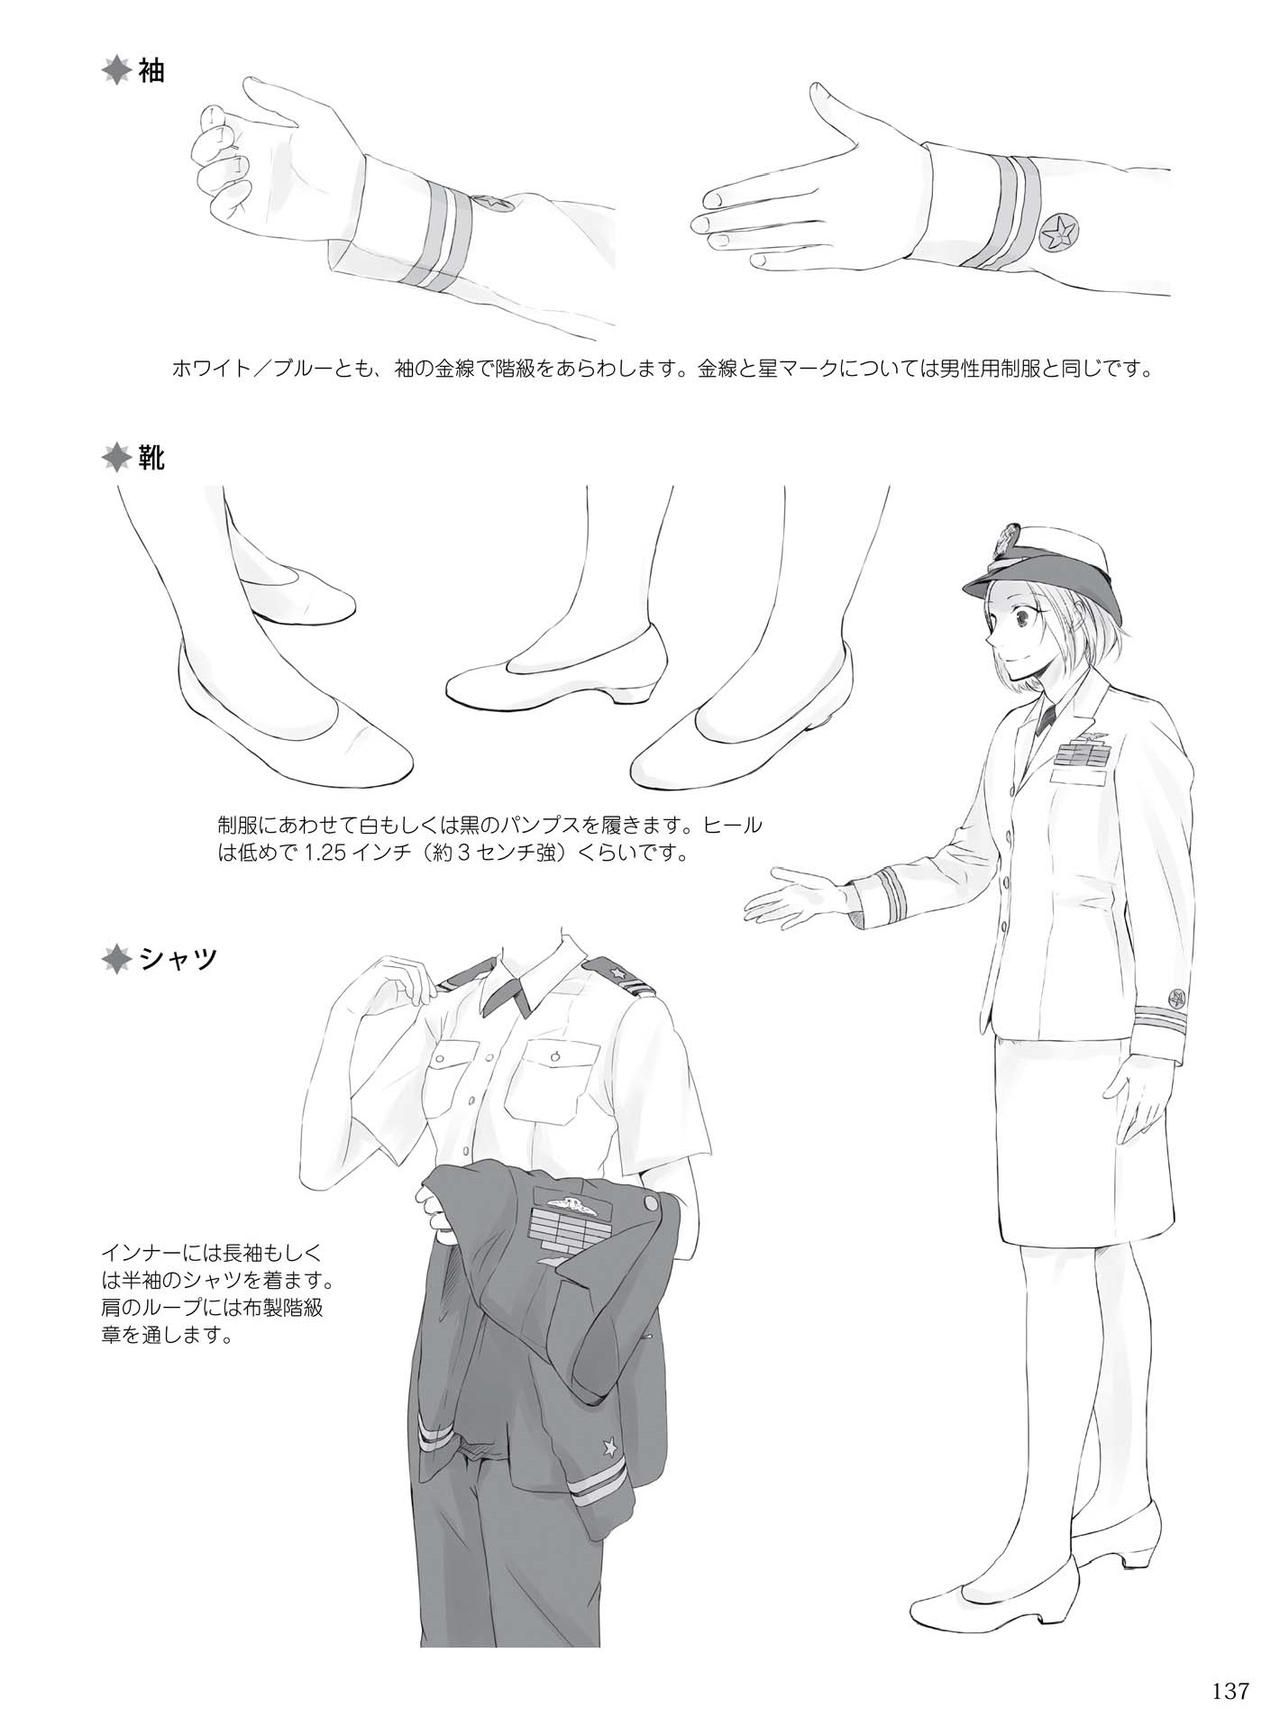 How to draw military uniforms and uniforms From Self-Defense Forces 軍服・制服の描き方 アメリカ軍・自衛隊の制服から戦闘服まで 140